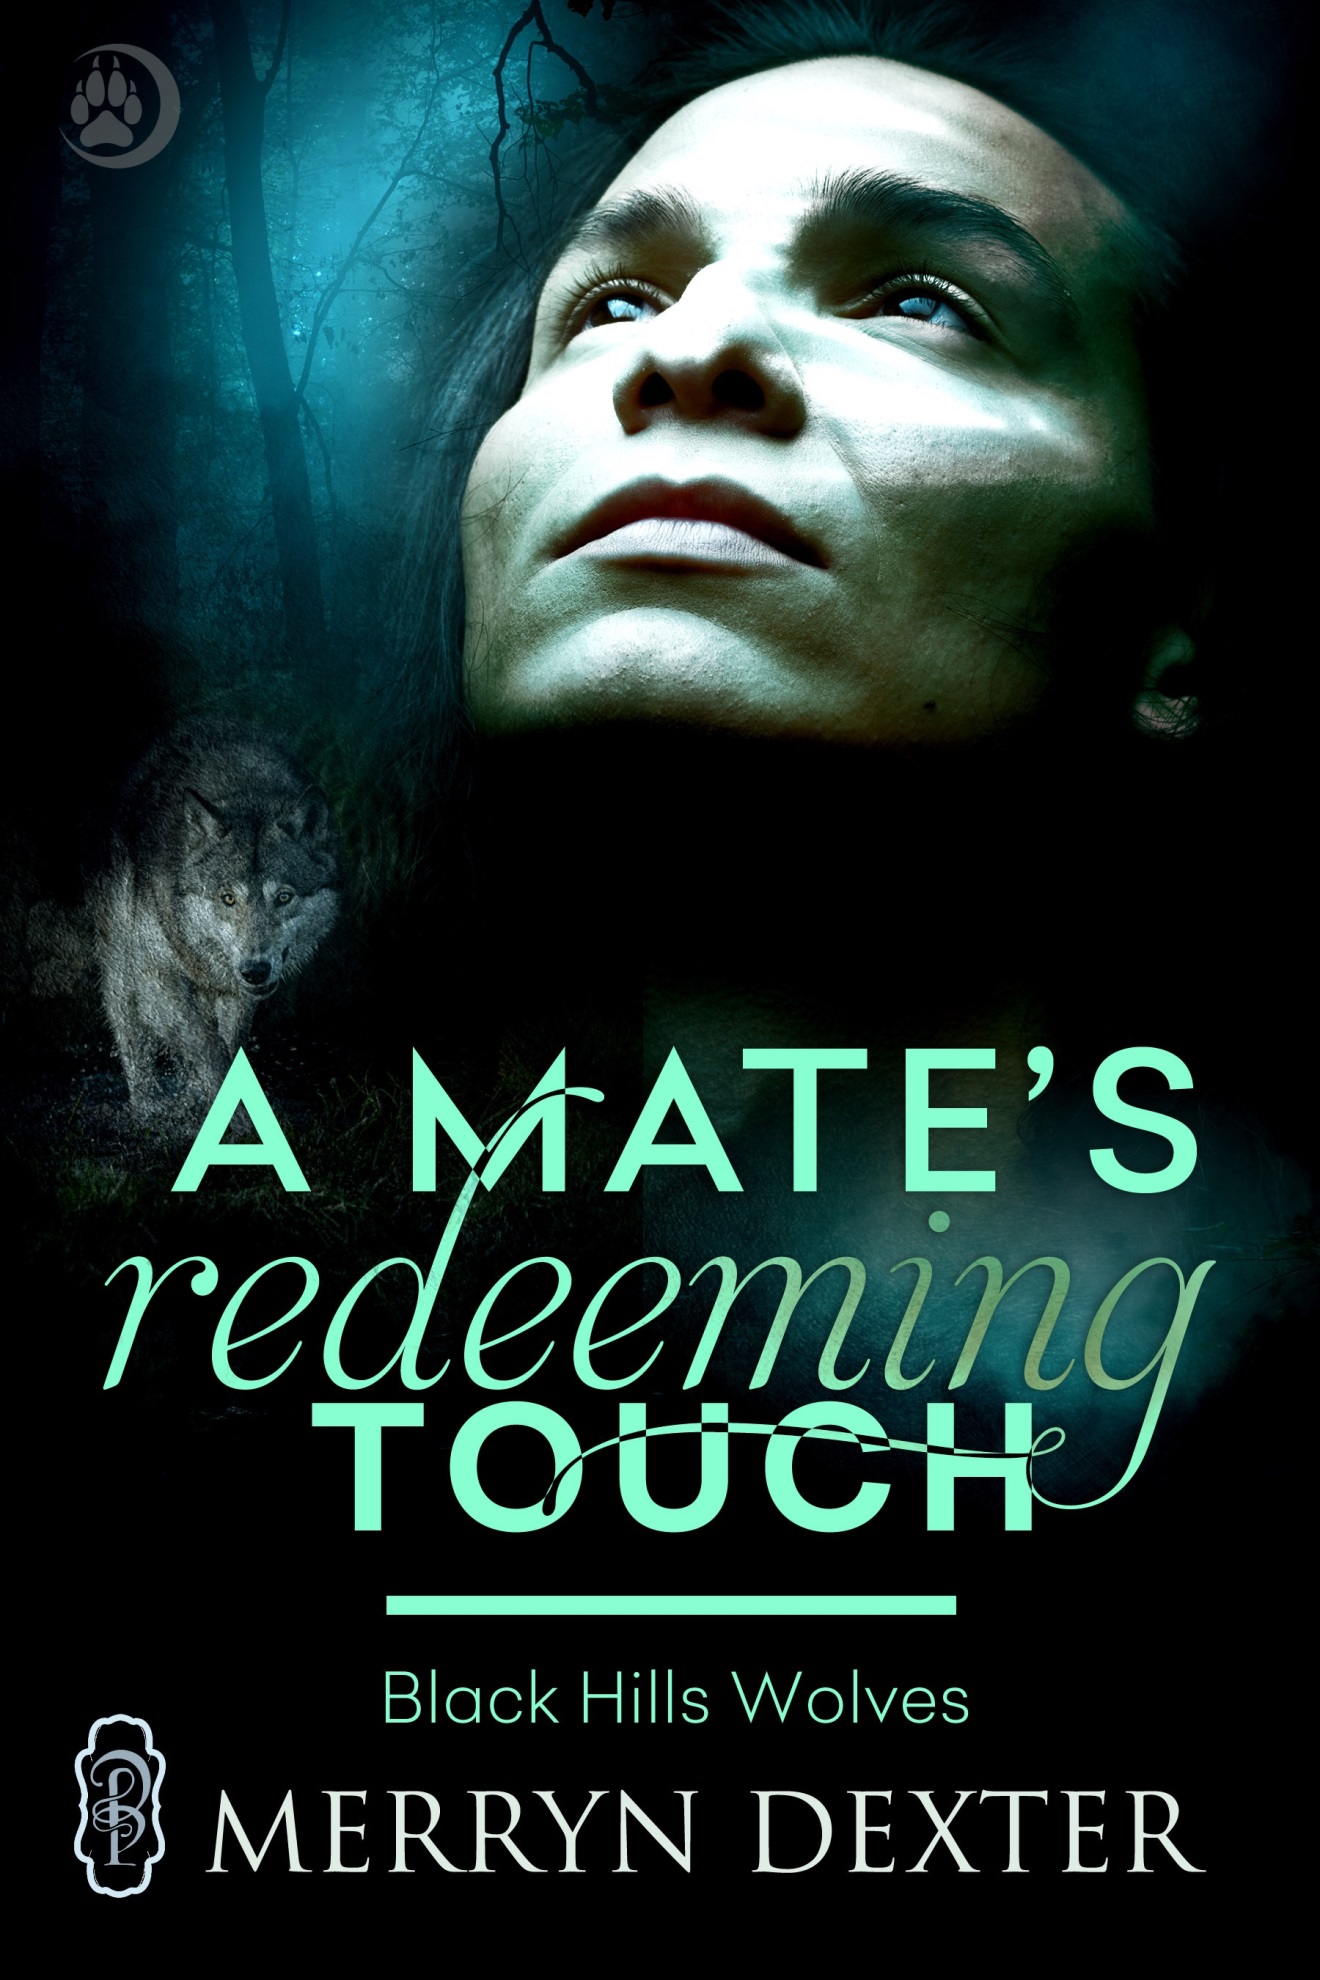 A Mate’s Redeeming Touch by Merryn Dexter